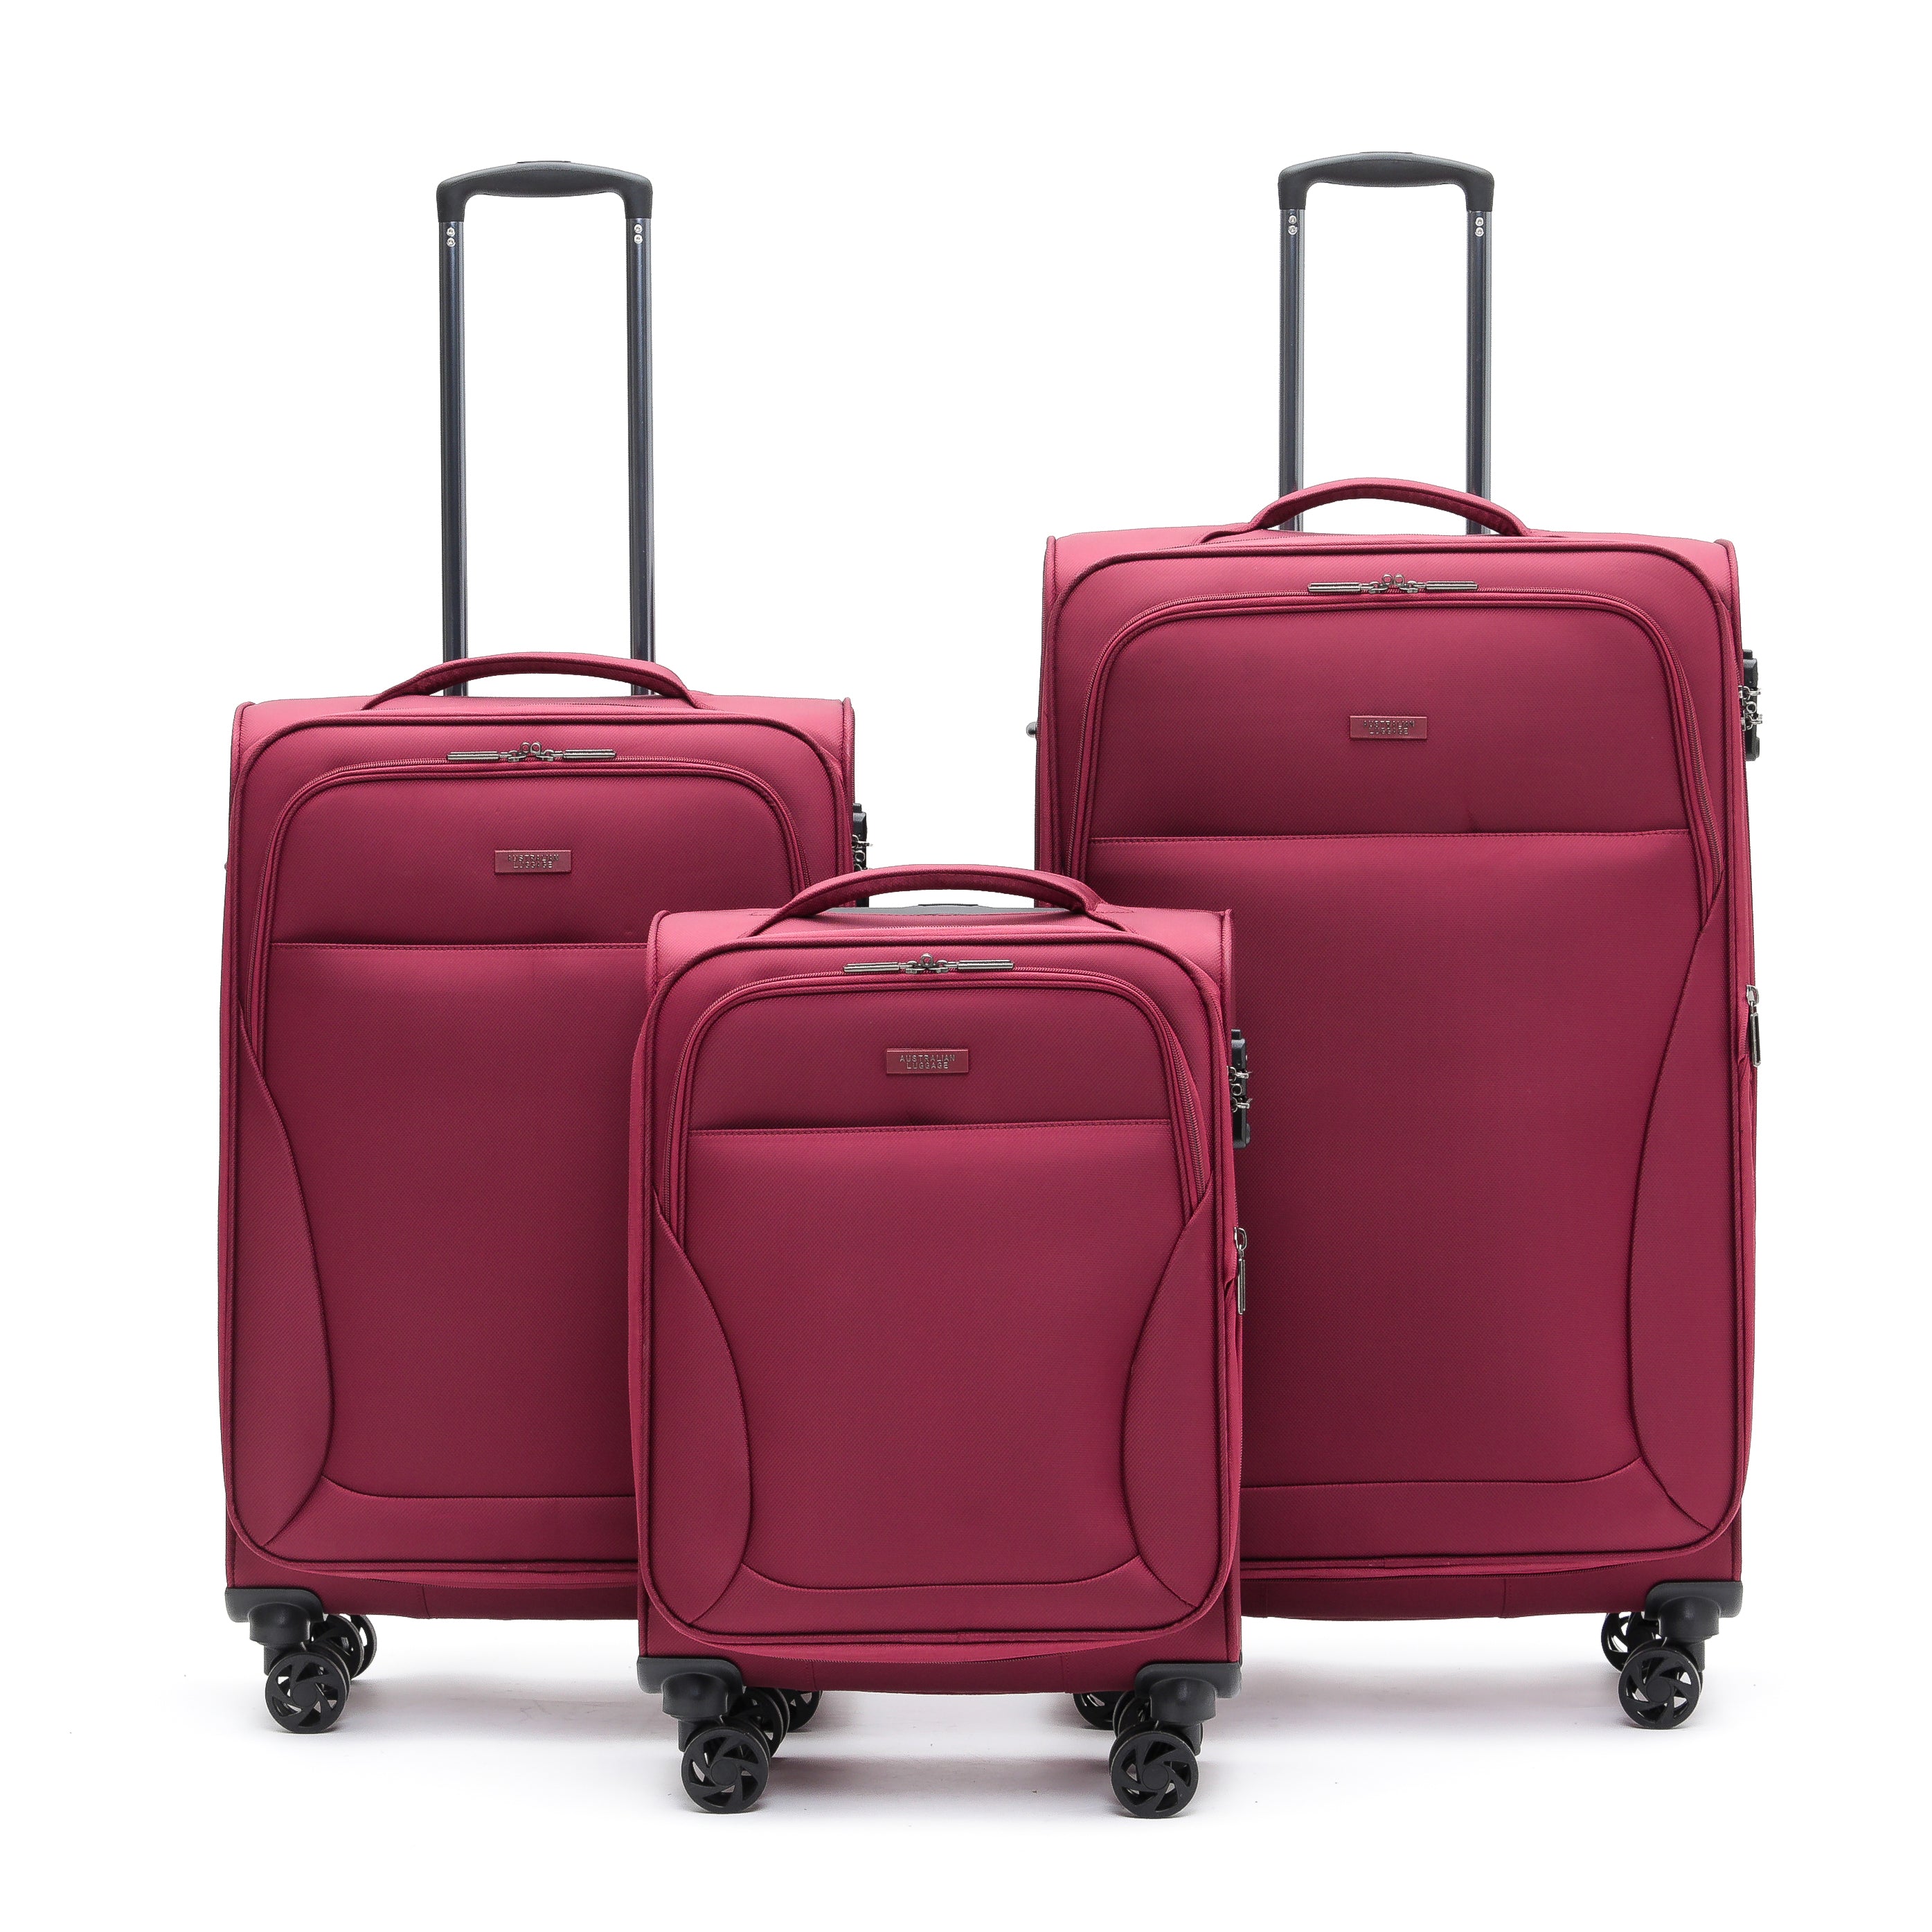 Aus Luggage - WINGS Set of 3 Suitcases - Wine - 0